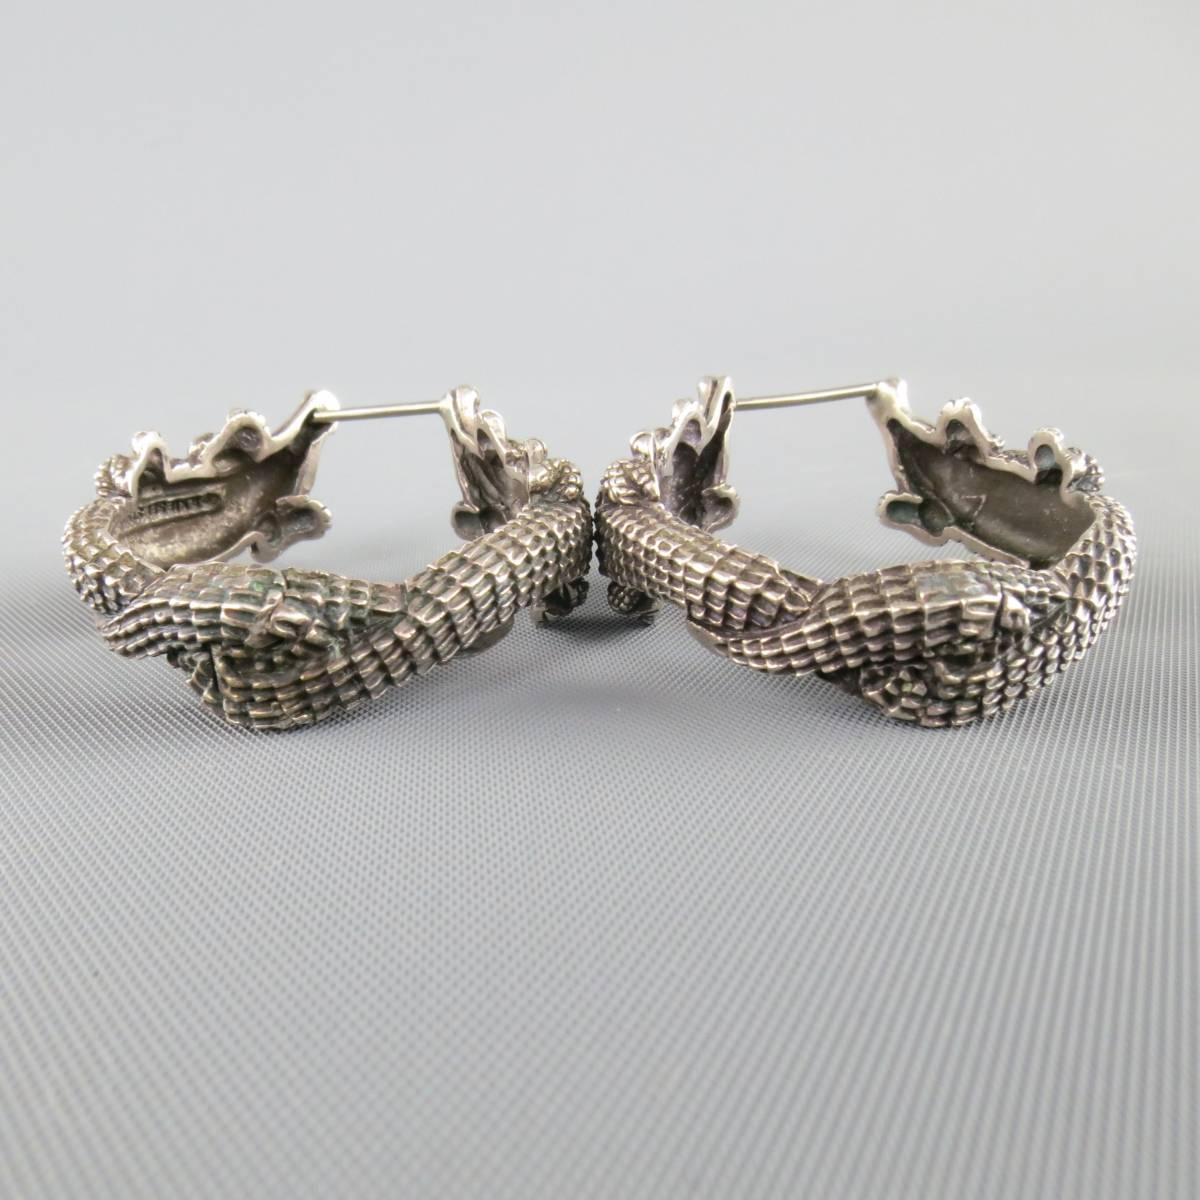 Vintage KIESELSTEIN-CORD hoop earrings come in a dark sterling silver and feature a double alligator motif.
 
Good Pre-Owned Condition.
Marked: 925
 
3.5 x 3.5 cm.


Web ID: 82037 